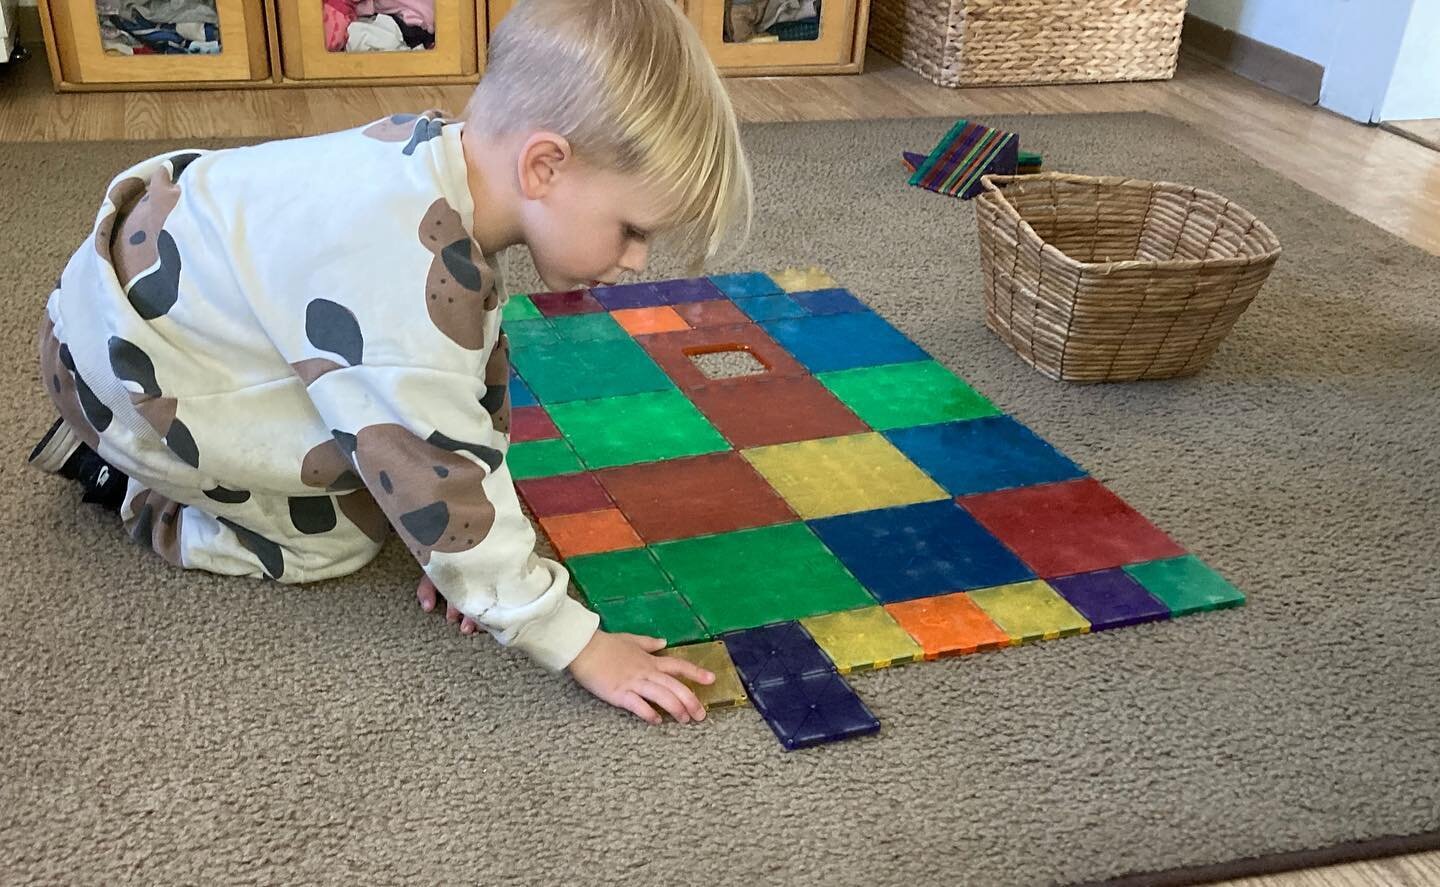 This child had a vision that required space away from the bustle of the main classroom. The teachers were able to offer him space in the &ldquo;quiet room&rdquo; and he was able to create his &ldquo;really big square.&rdquo; Preschool should be less 